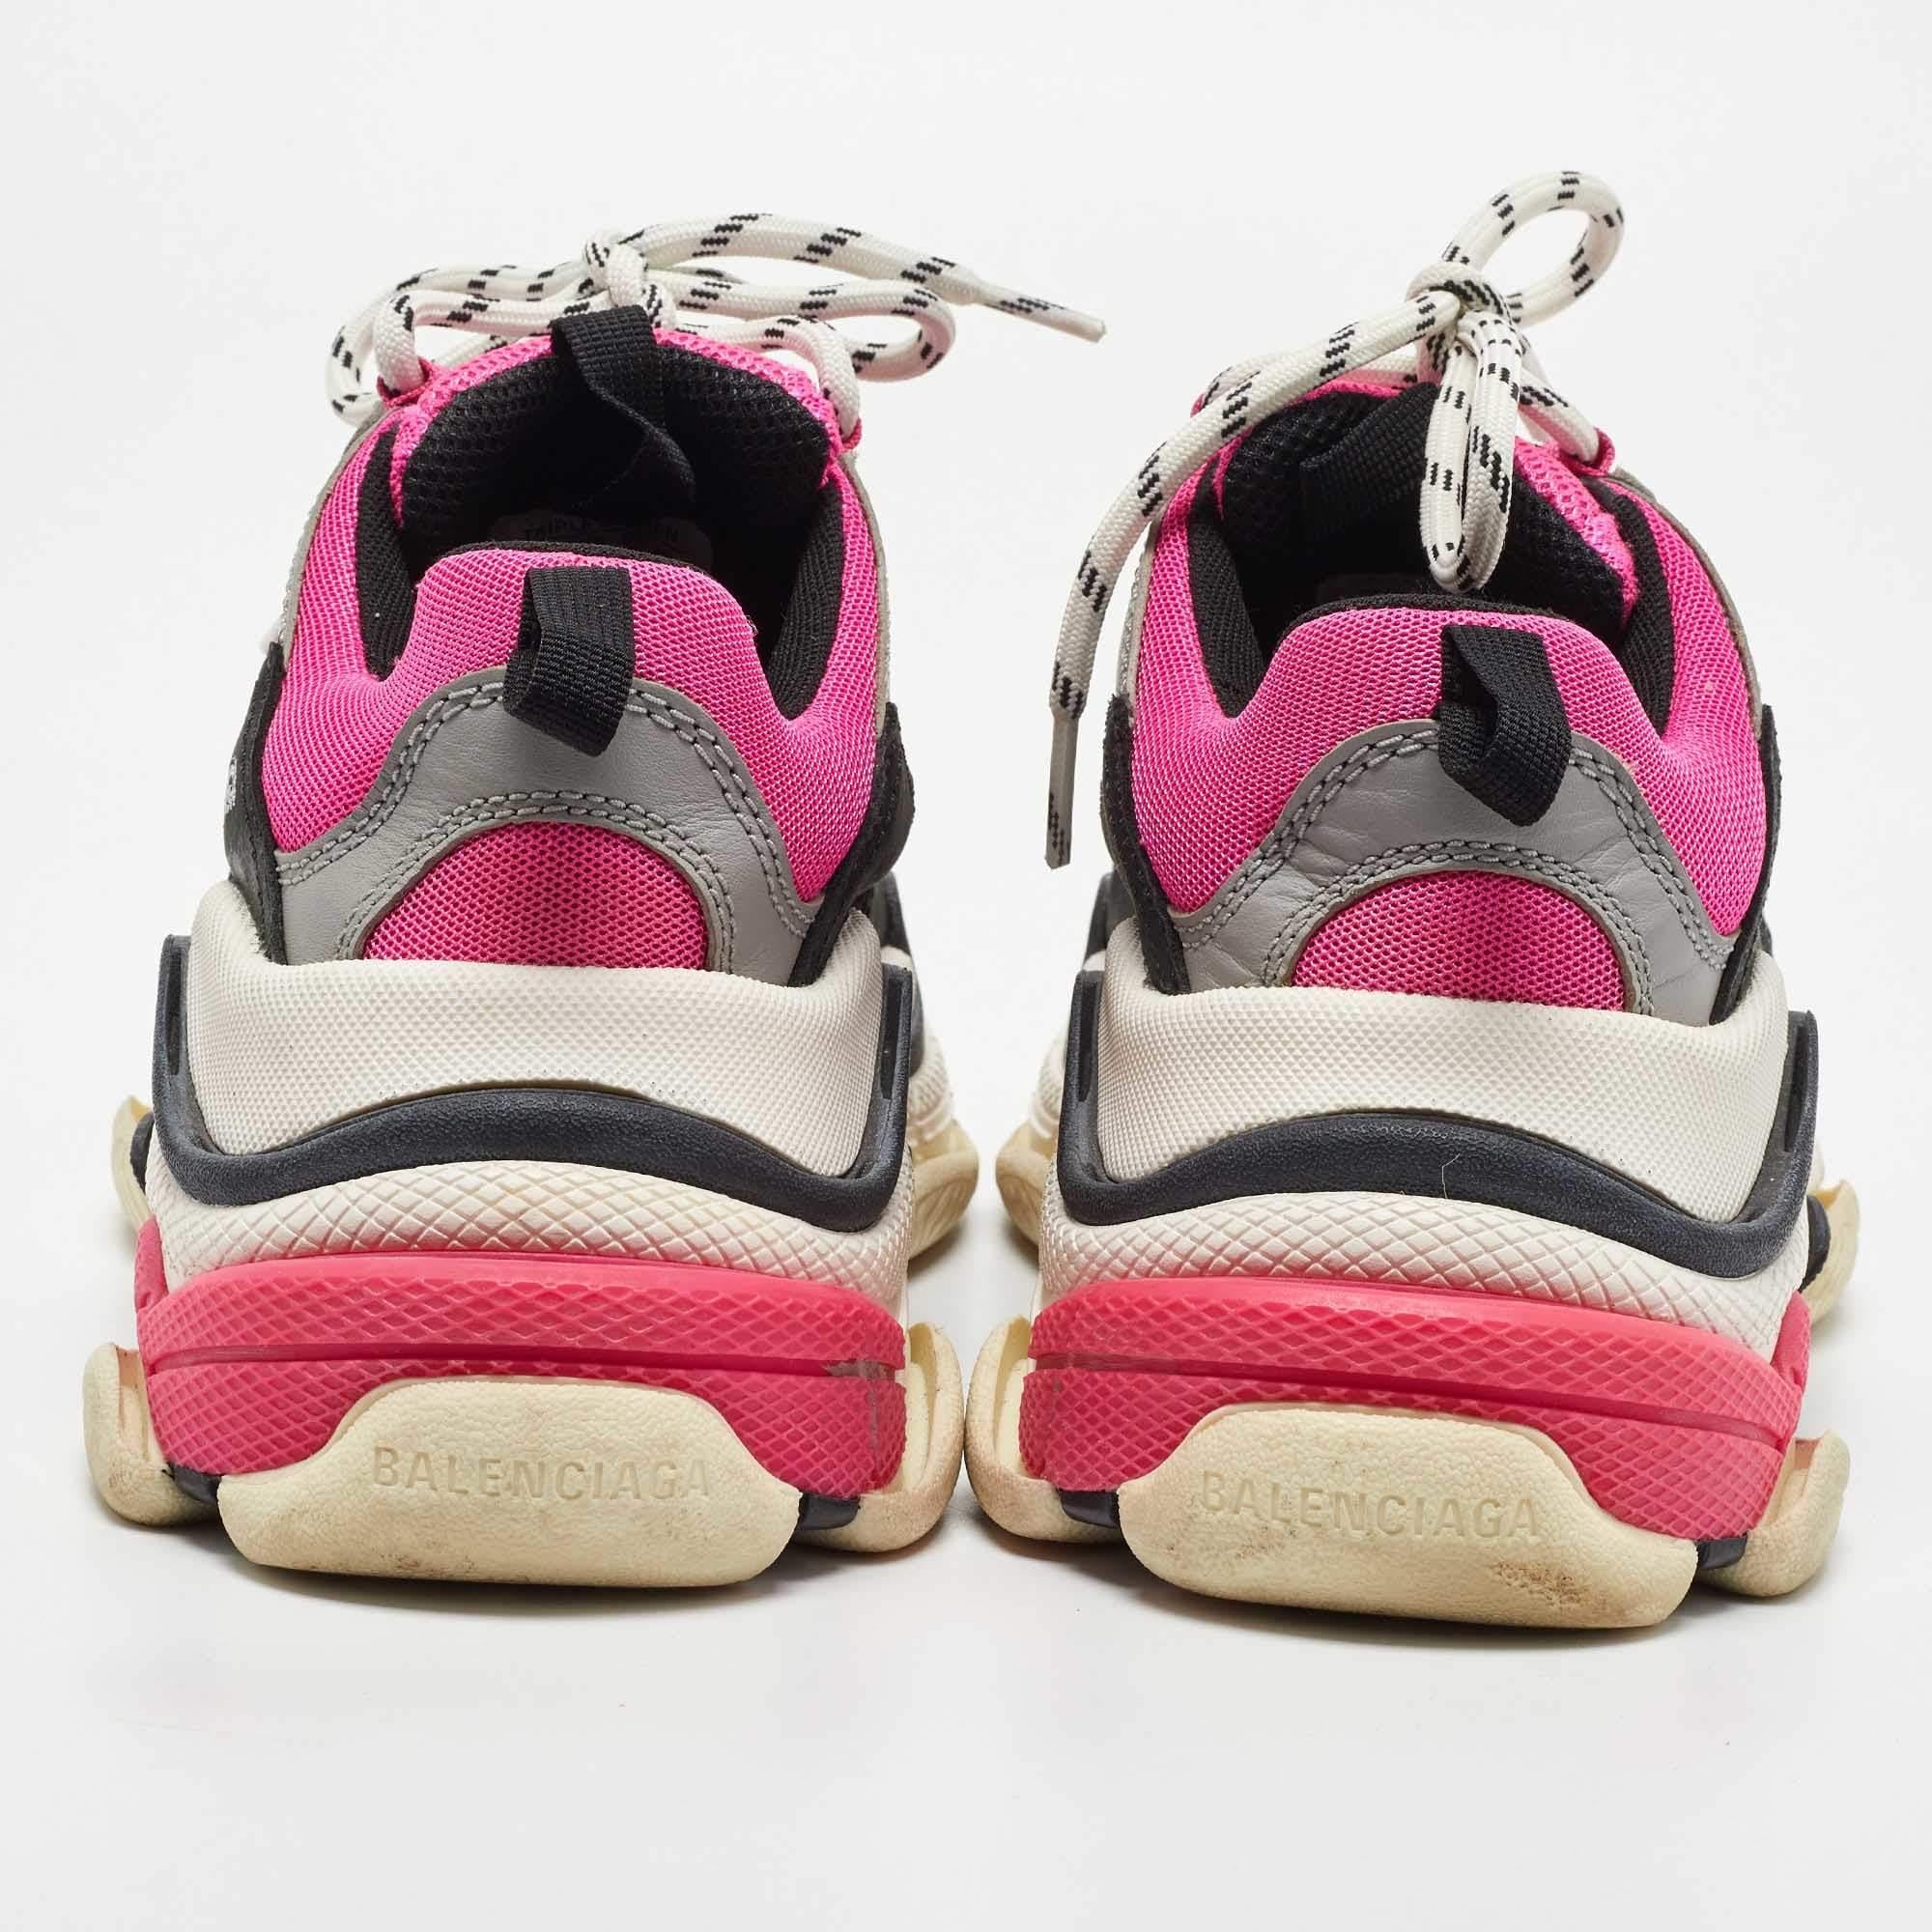 Balenciaga Pink/Black Mesh and Leather Triple S Sneakers Size 37 For Sale 1